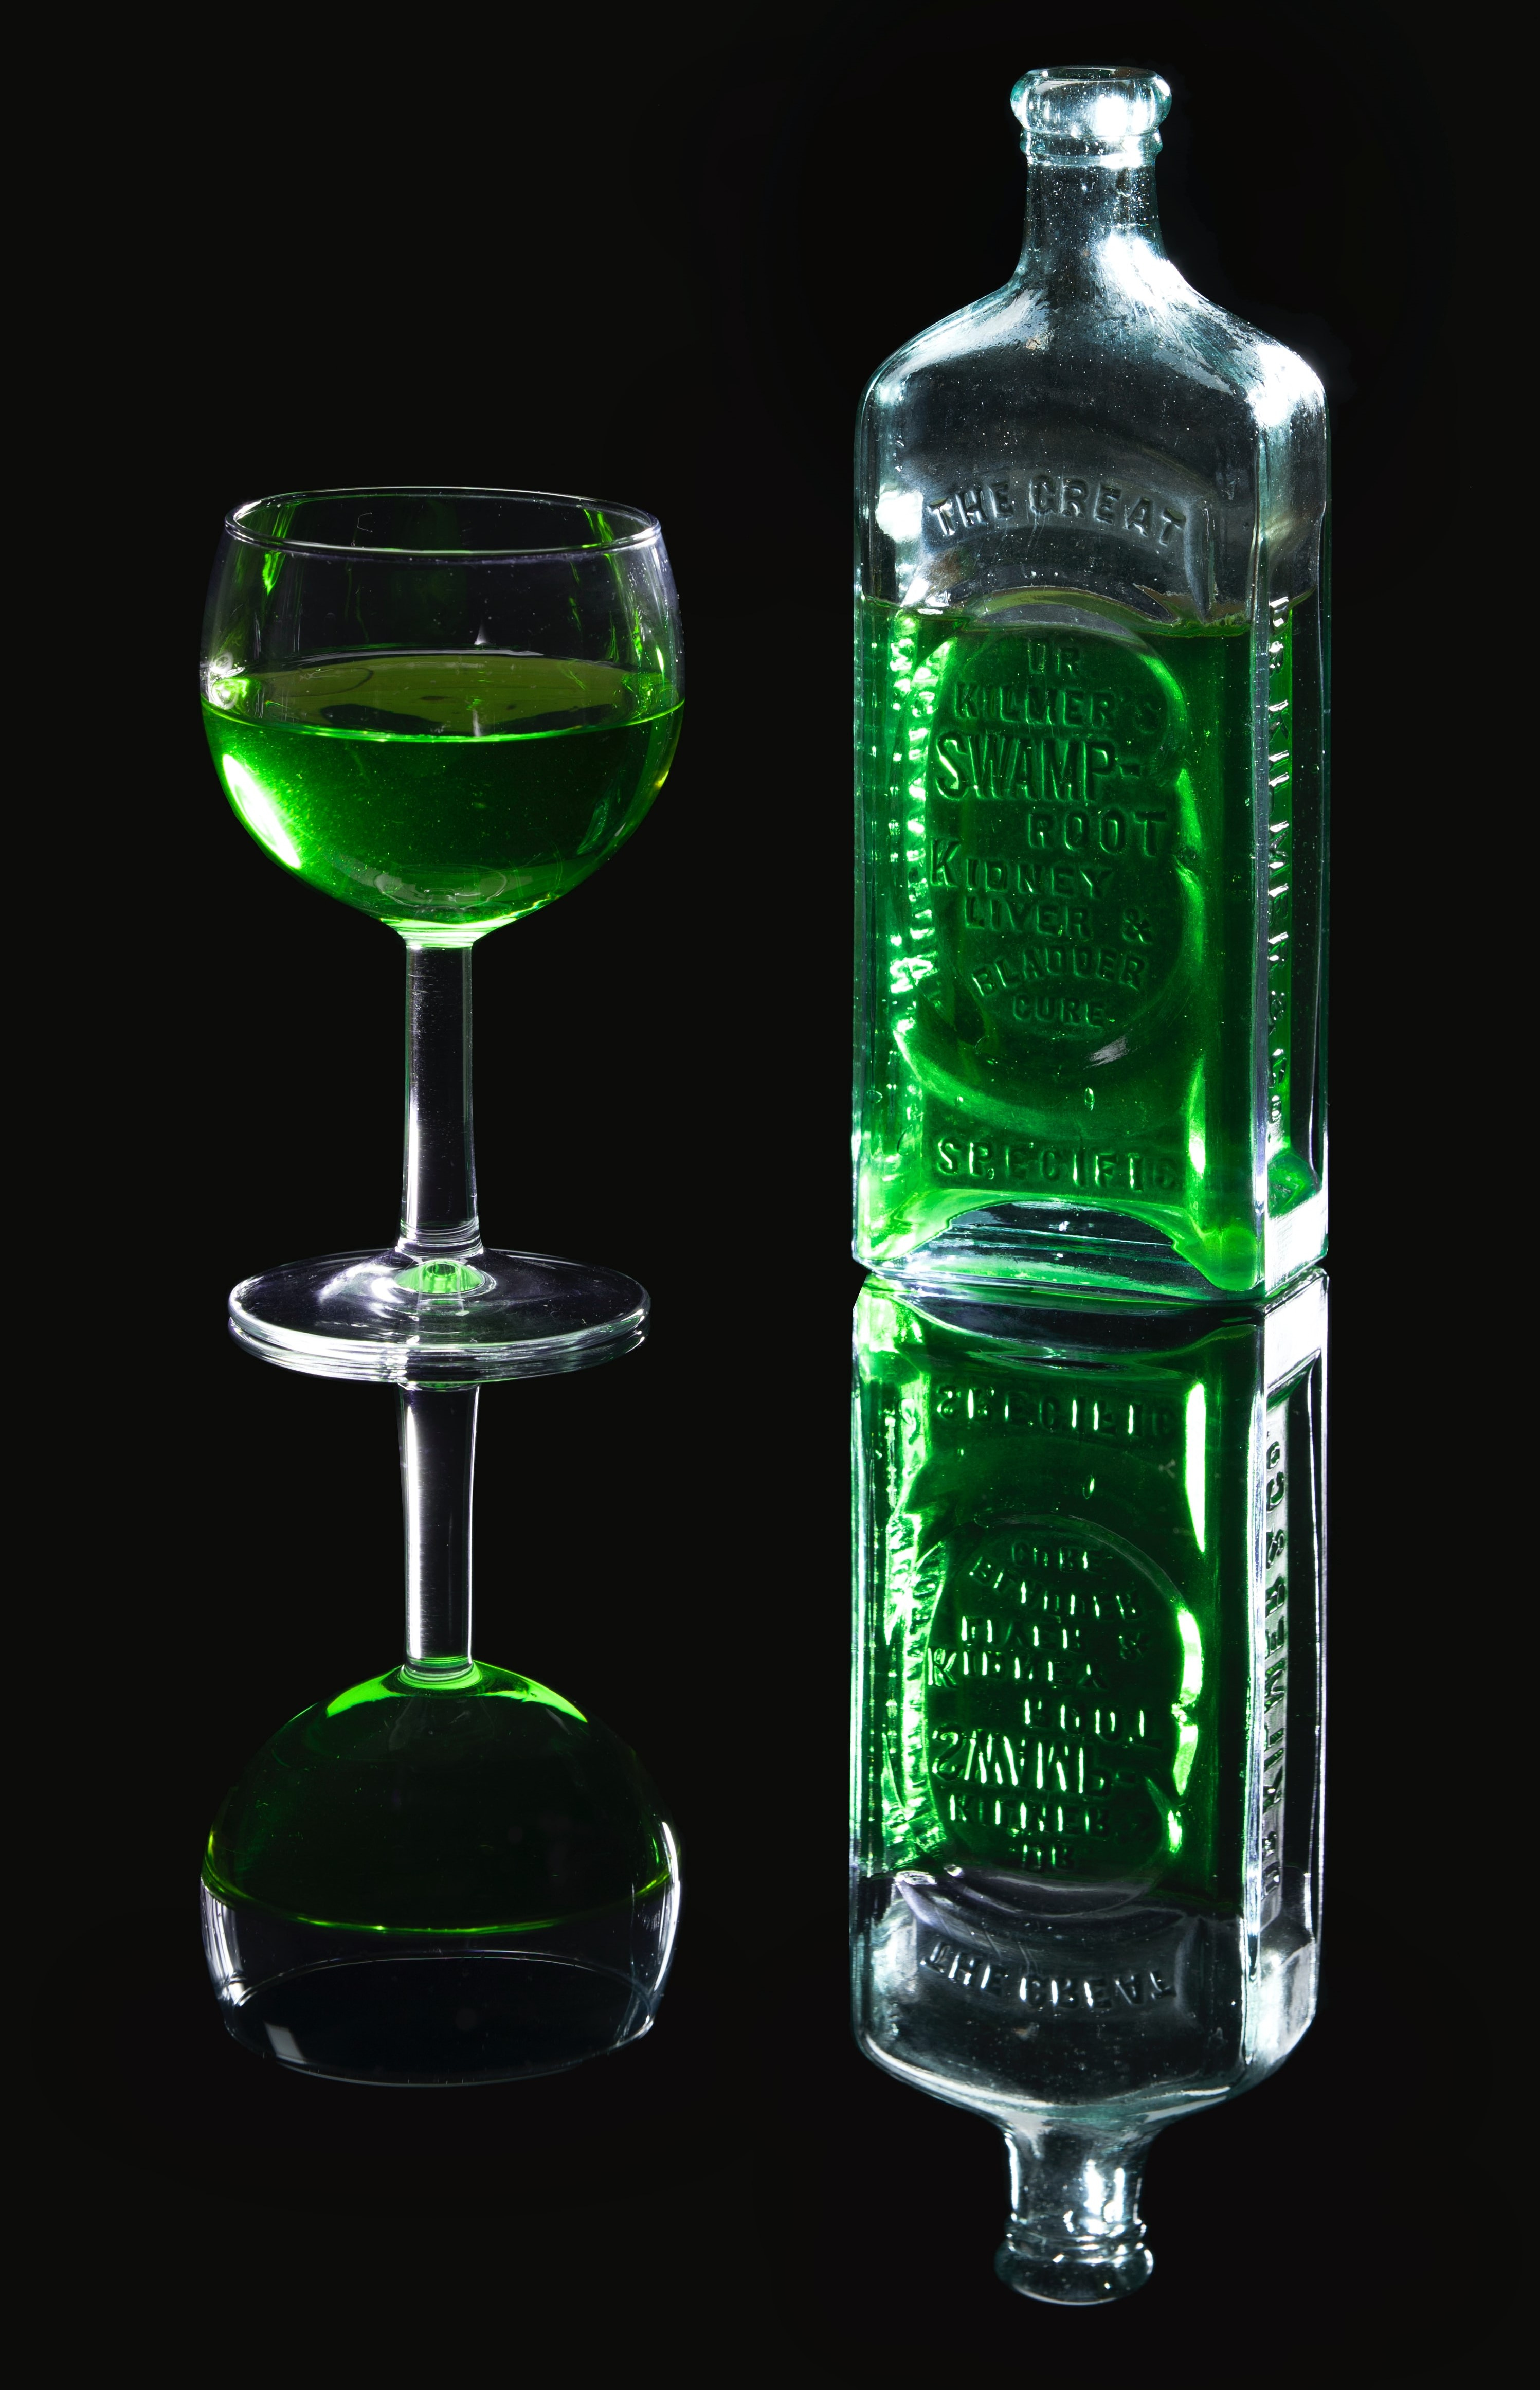 Does Absinthe Really Cause Hallucinations?